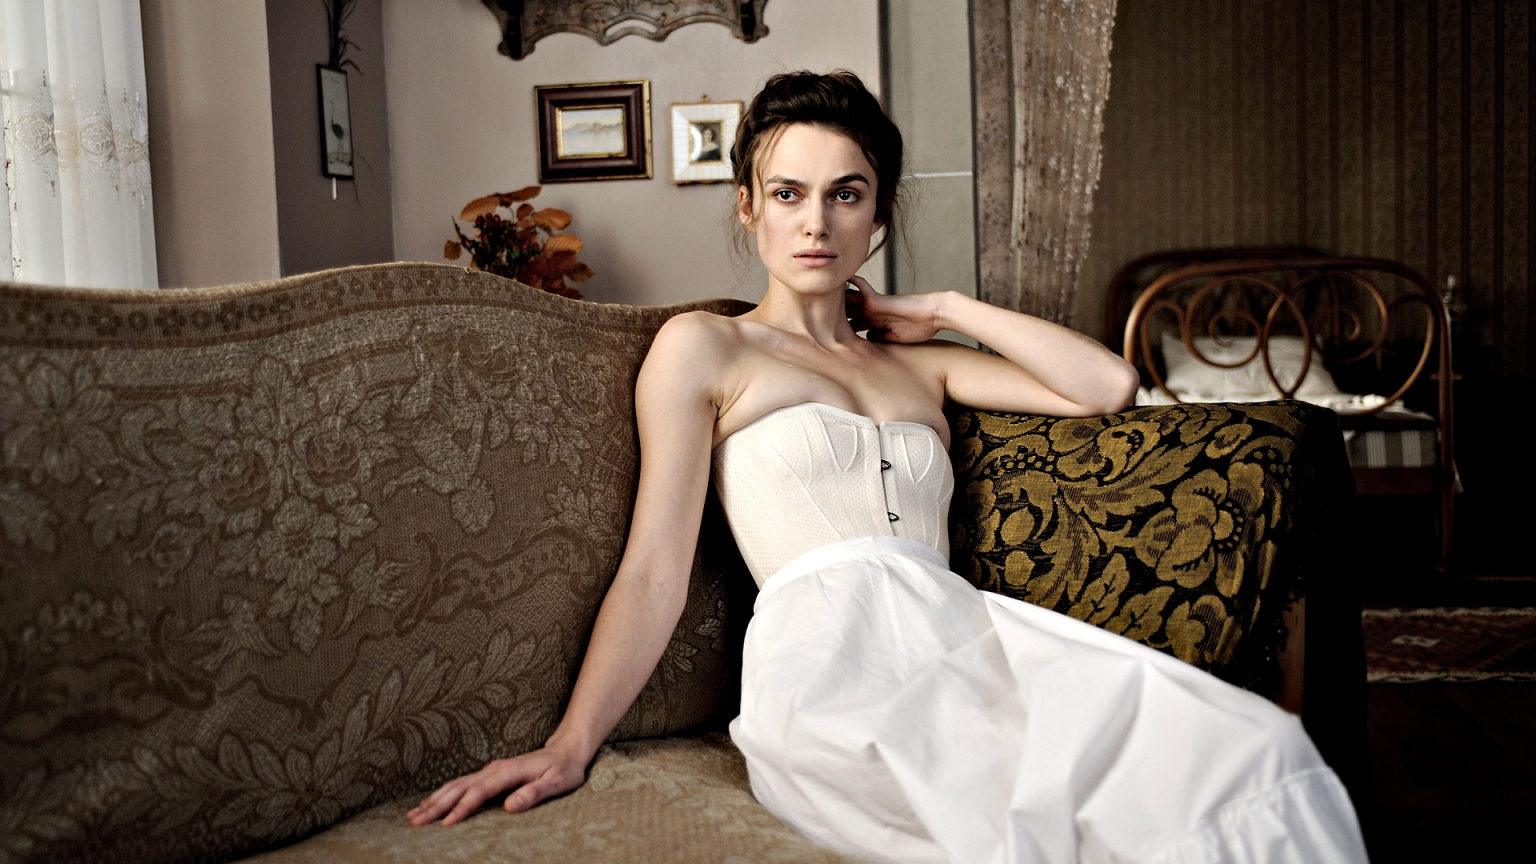 Keira Knightley A Dangerous Method for 1536 x 864 HDTV resolution